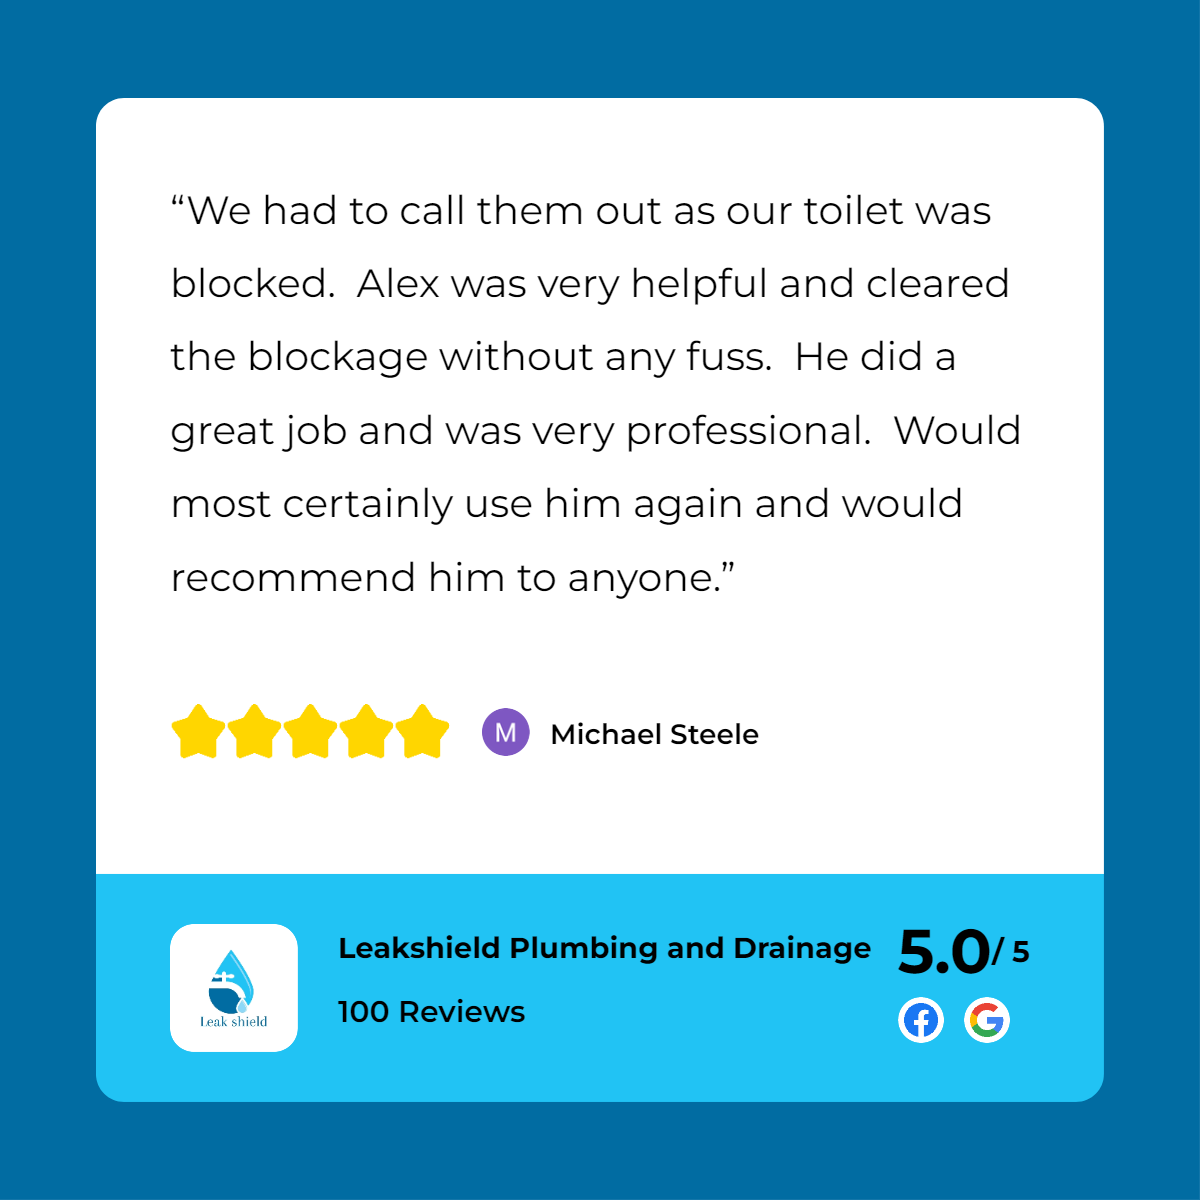 A customer review for leahy plumbing and toilets.